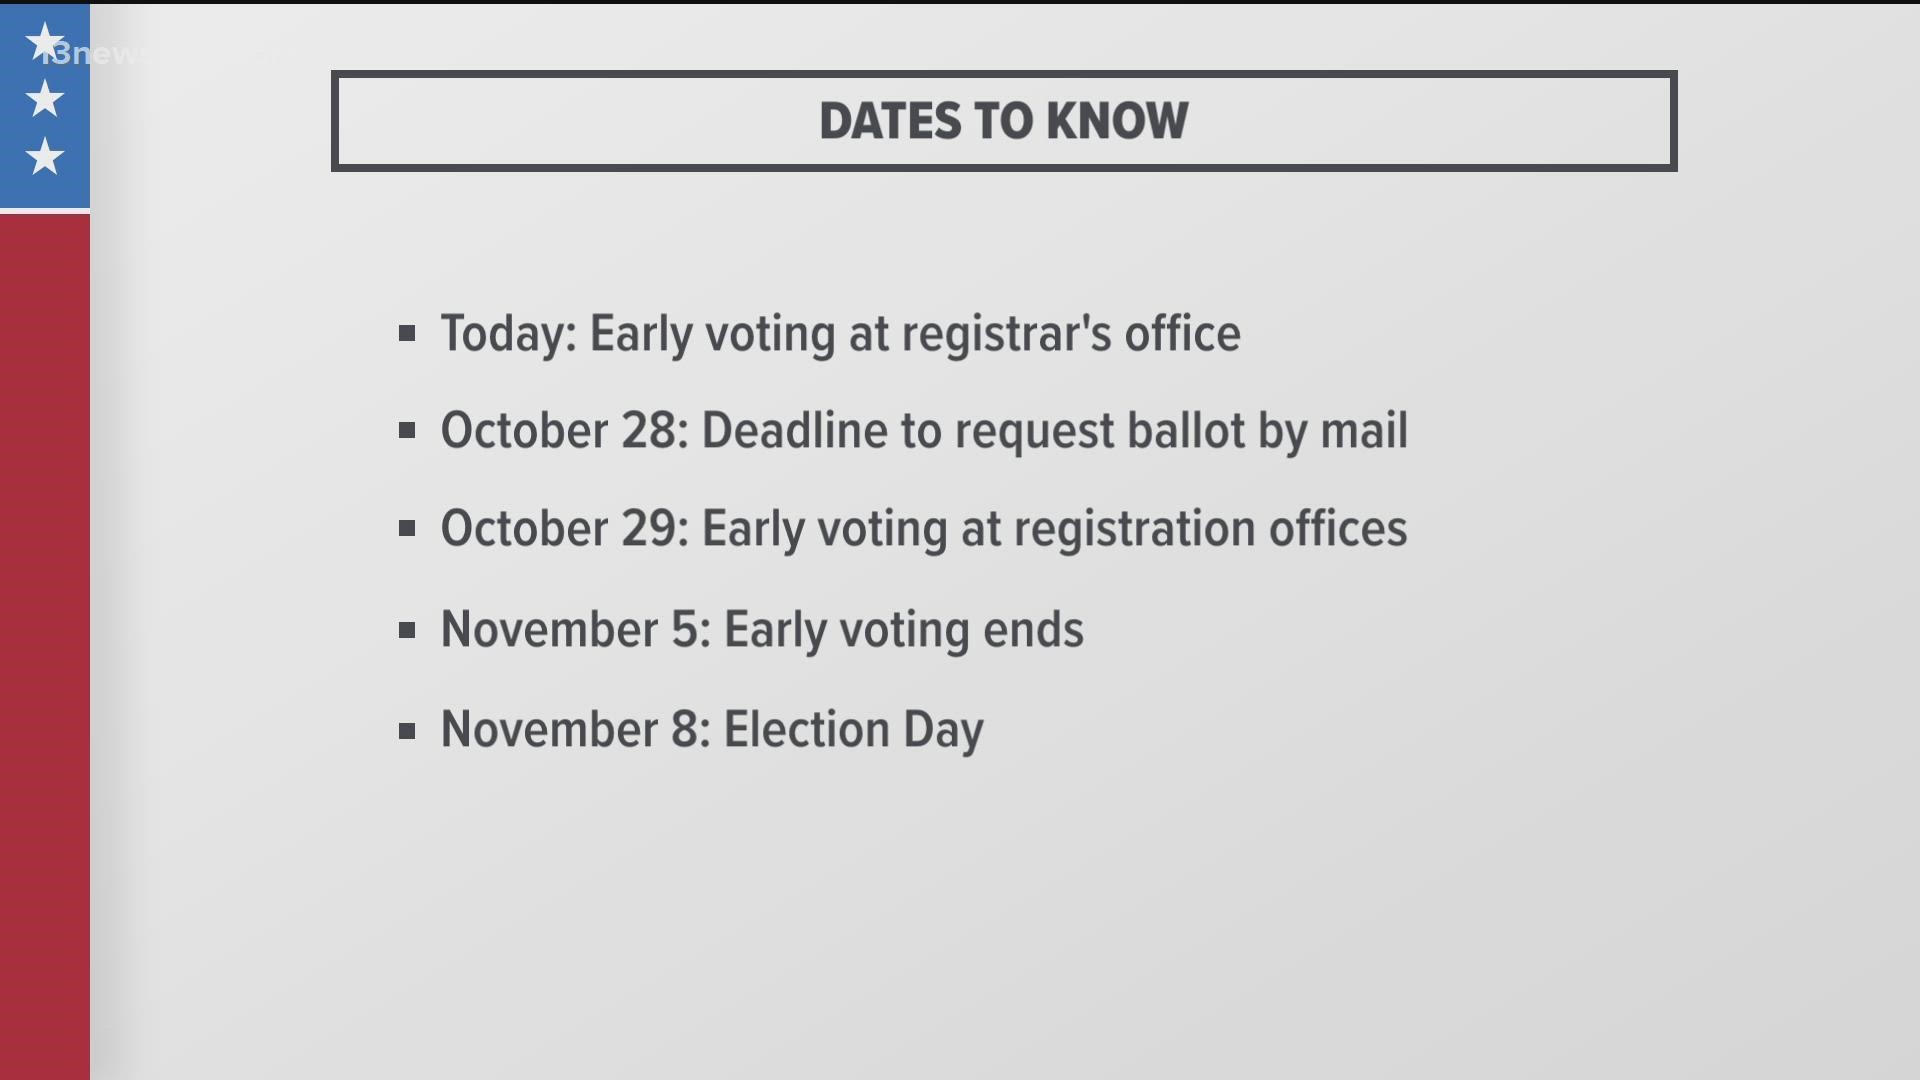 There are several opportunities to cast your ballot even before November 8.